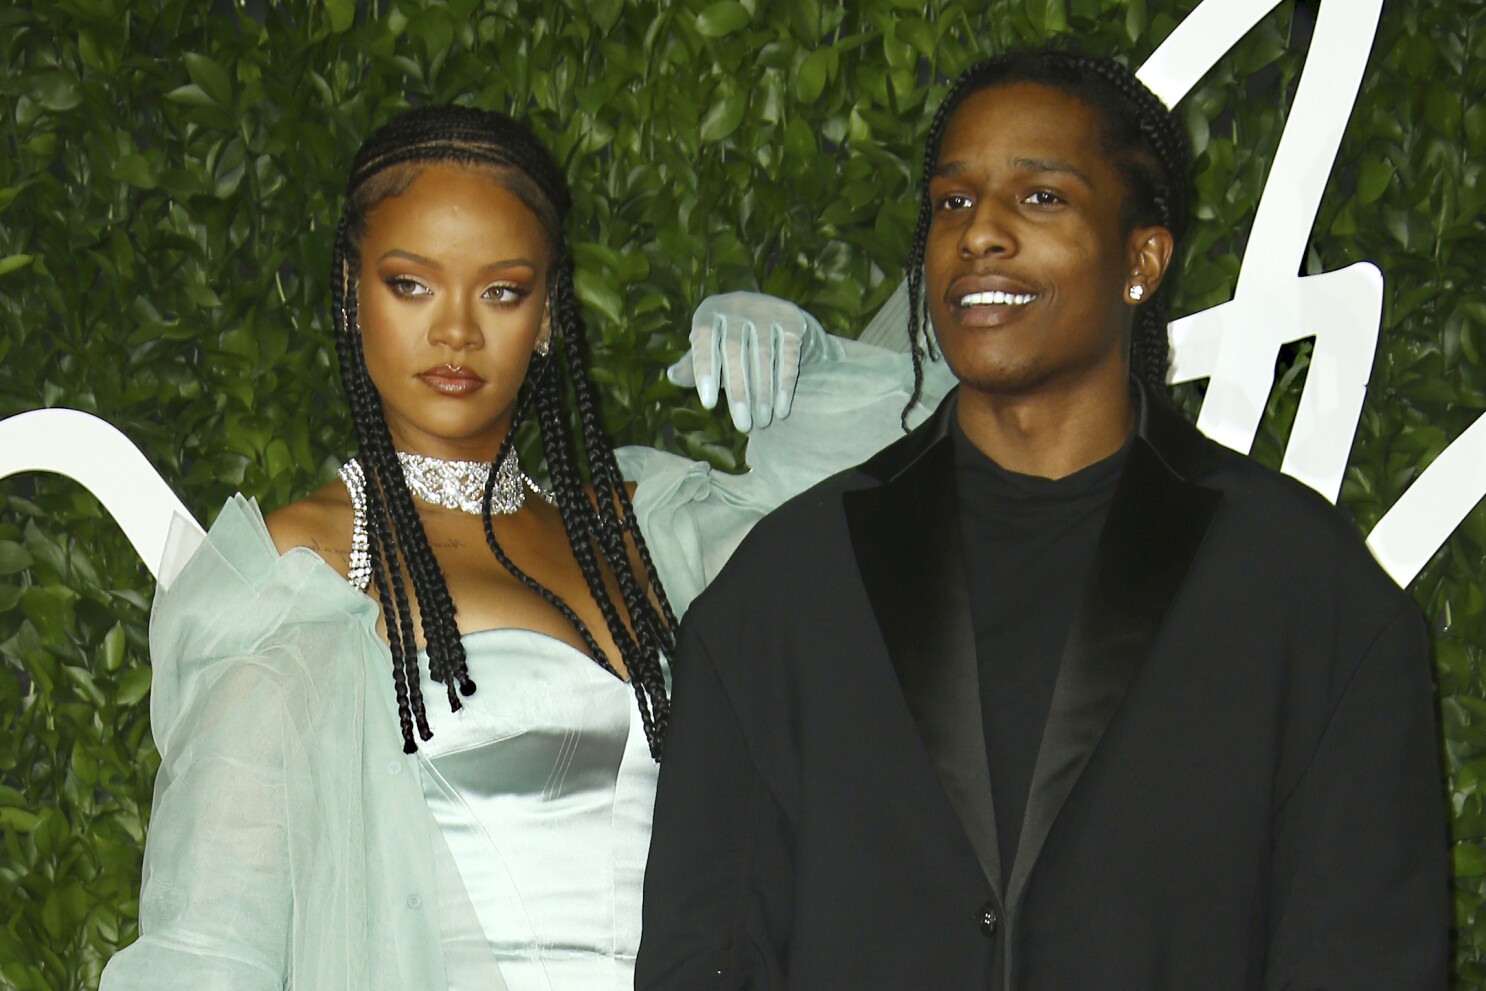 ASAP Rocky confirms he and Rihanna are dating. Duh! - Los Angeles Times